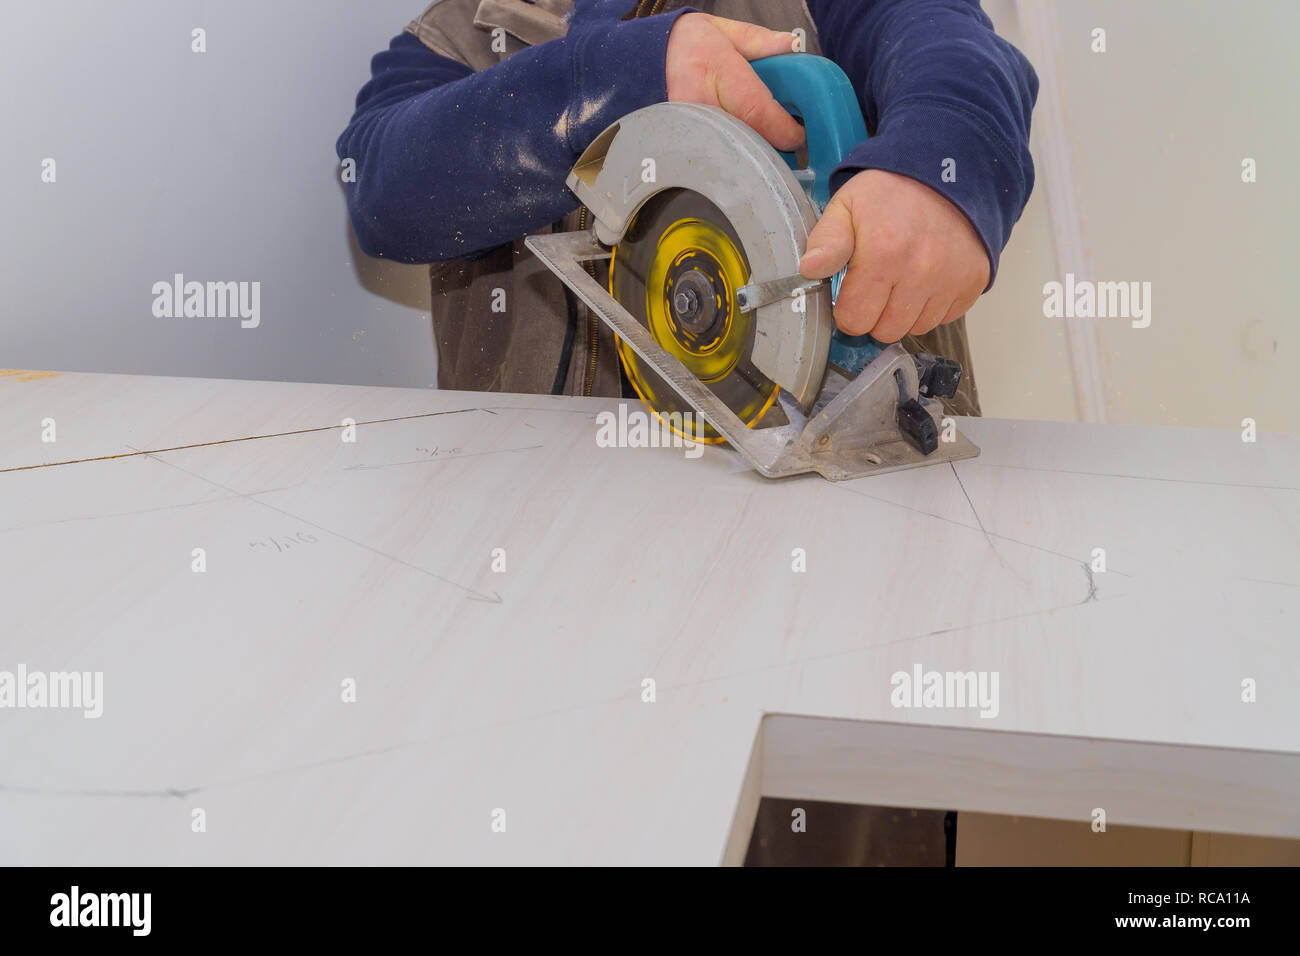 Carpenter Uses A Saw To Cut Laminate Counter Top In The Sink Stock